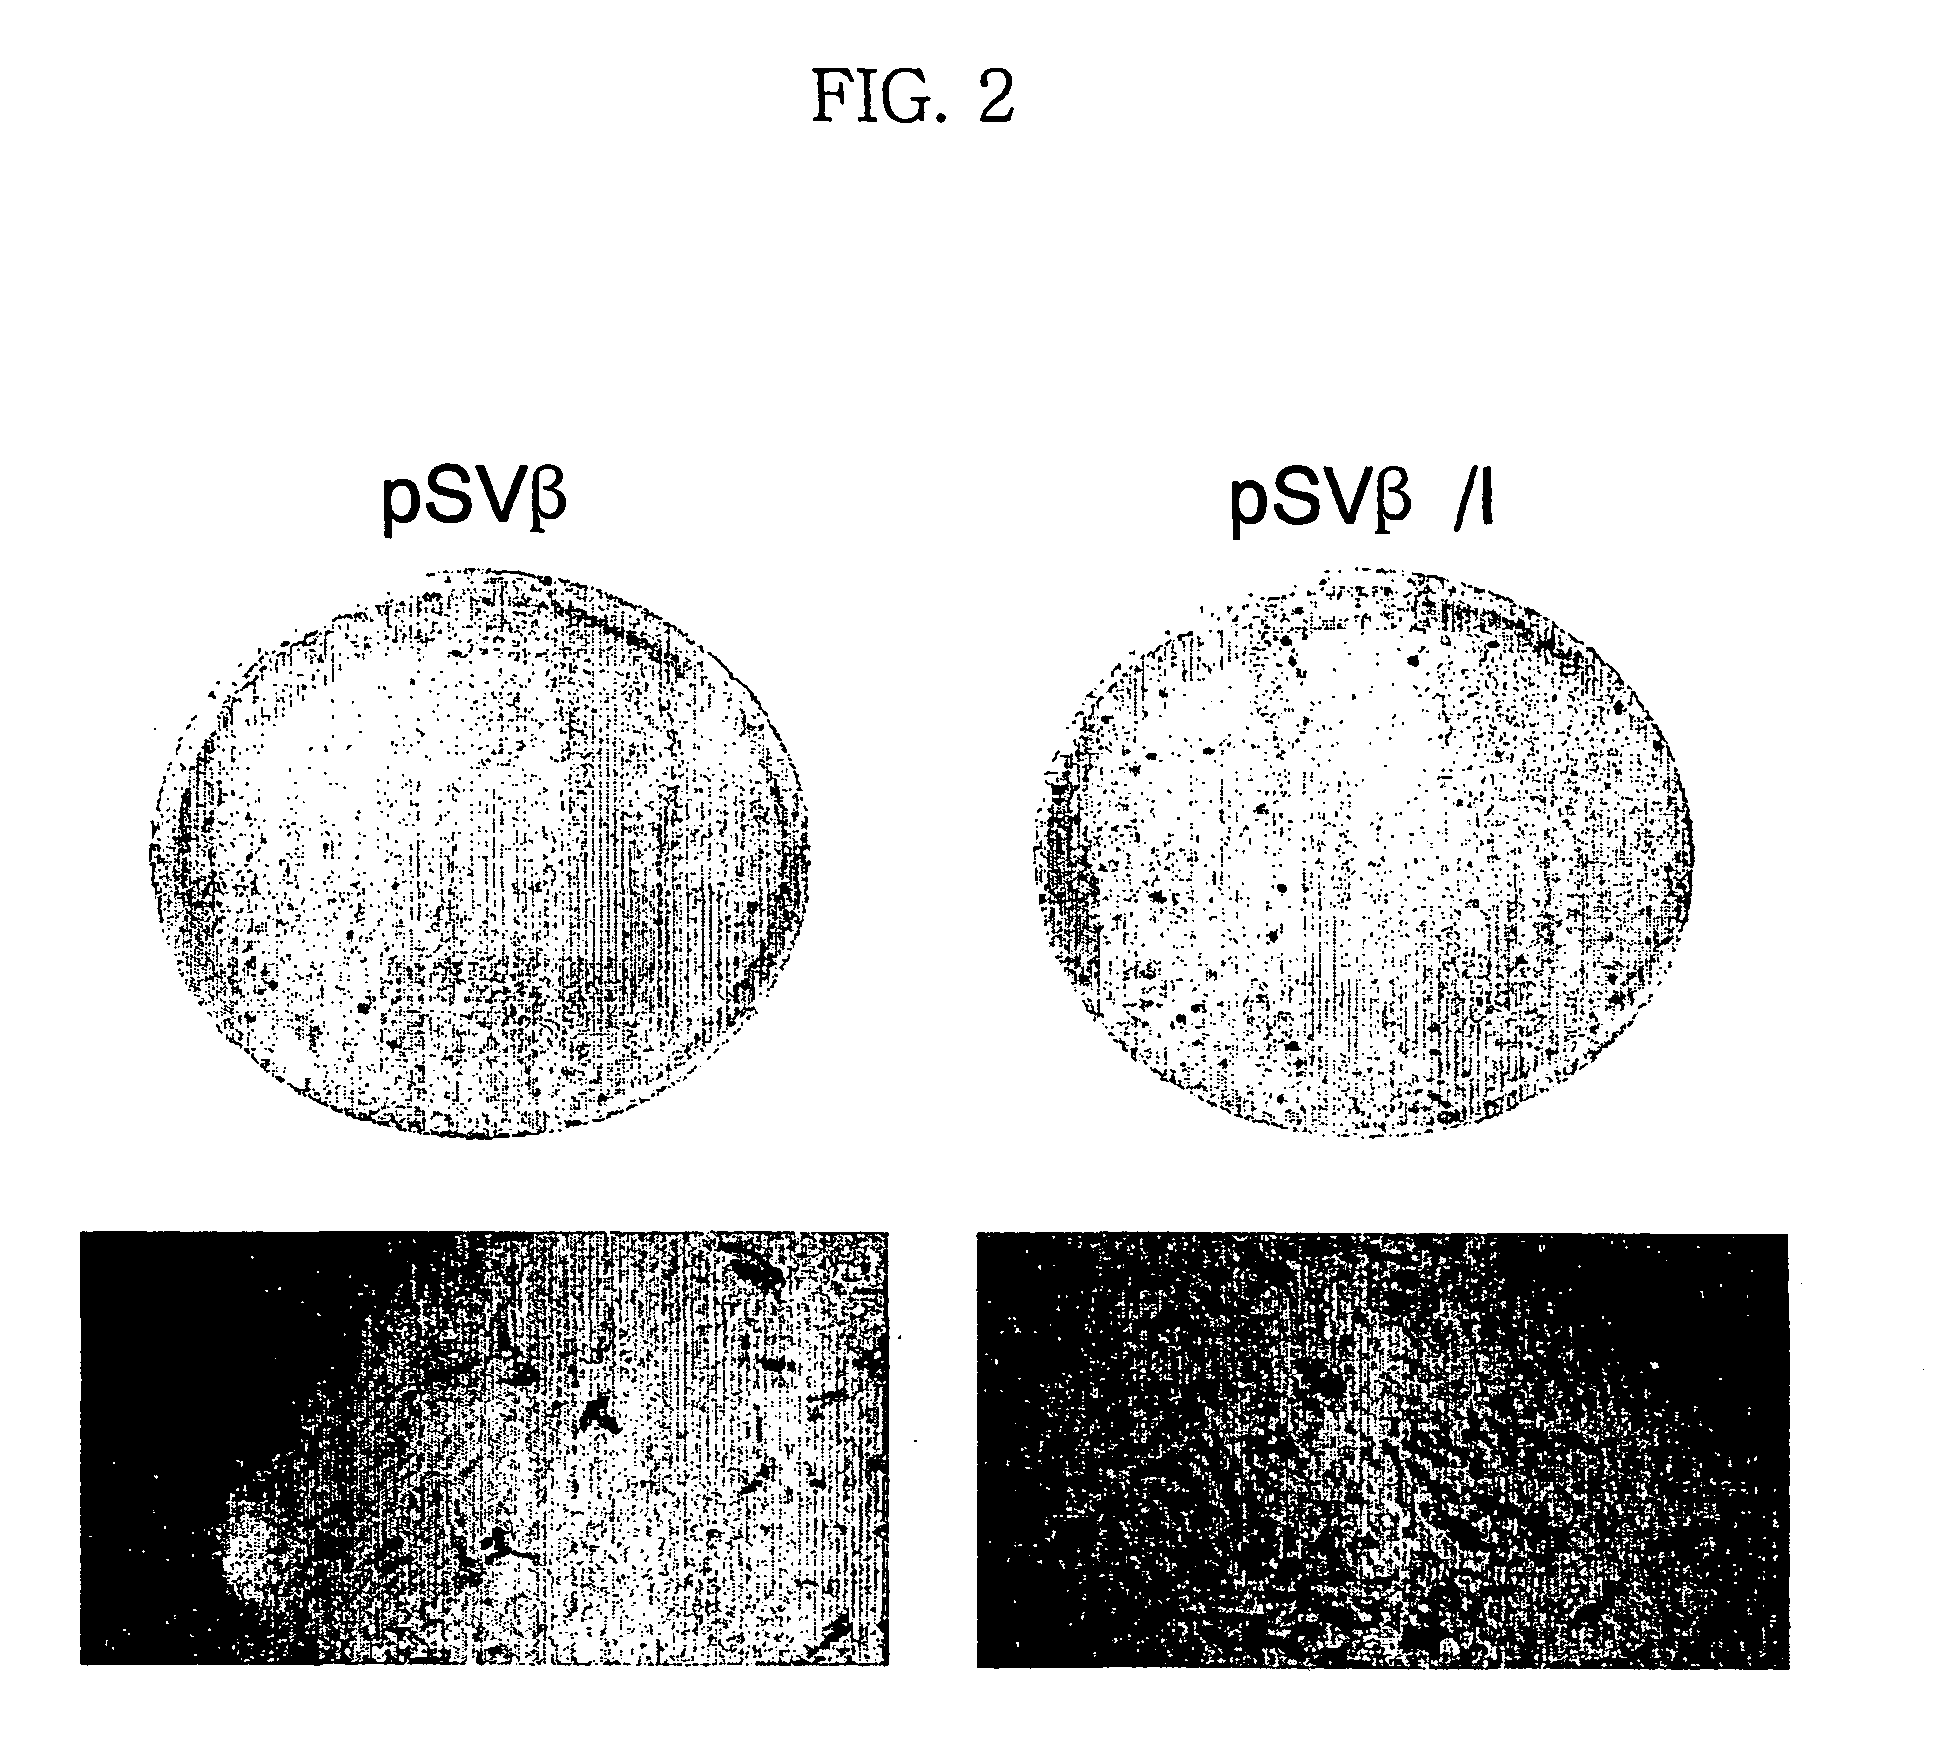 Expression vector for animal cell containing nuclear matrix attachment region of interferon beta